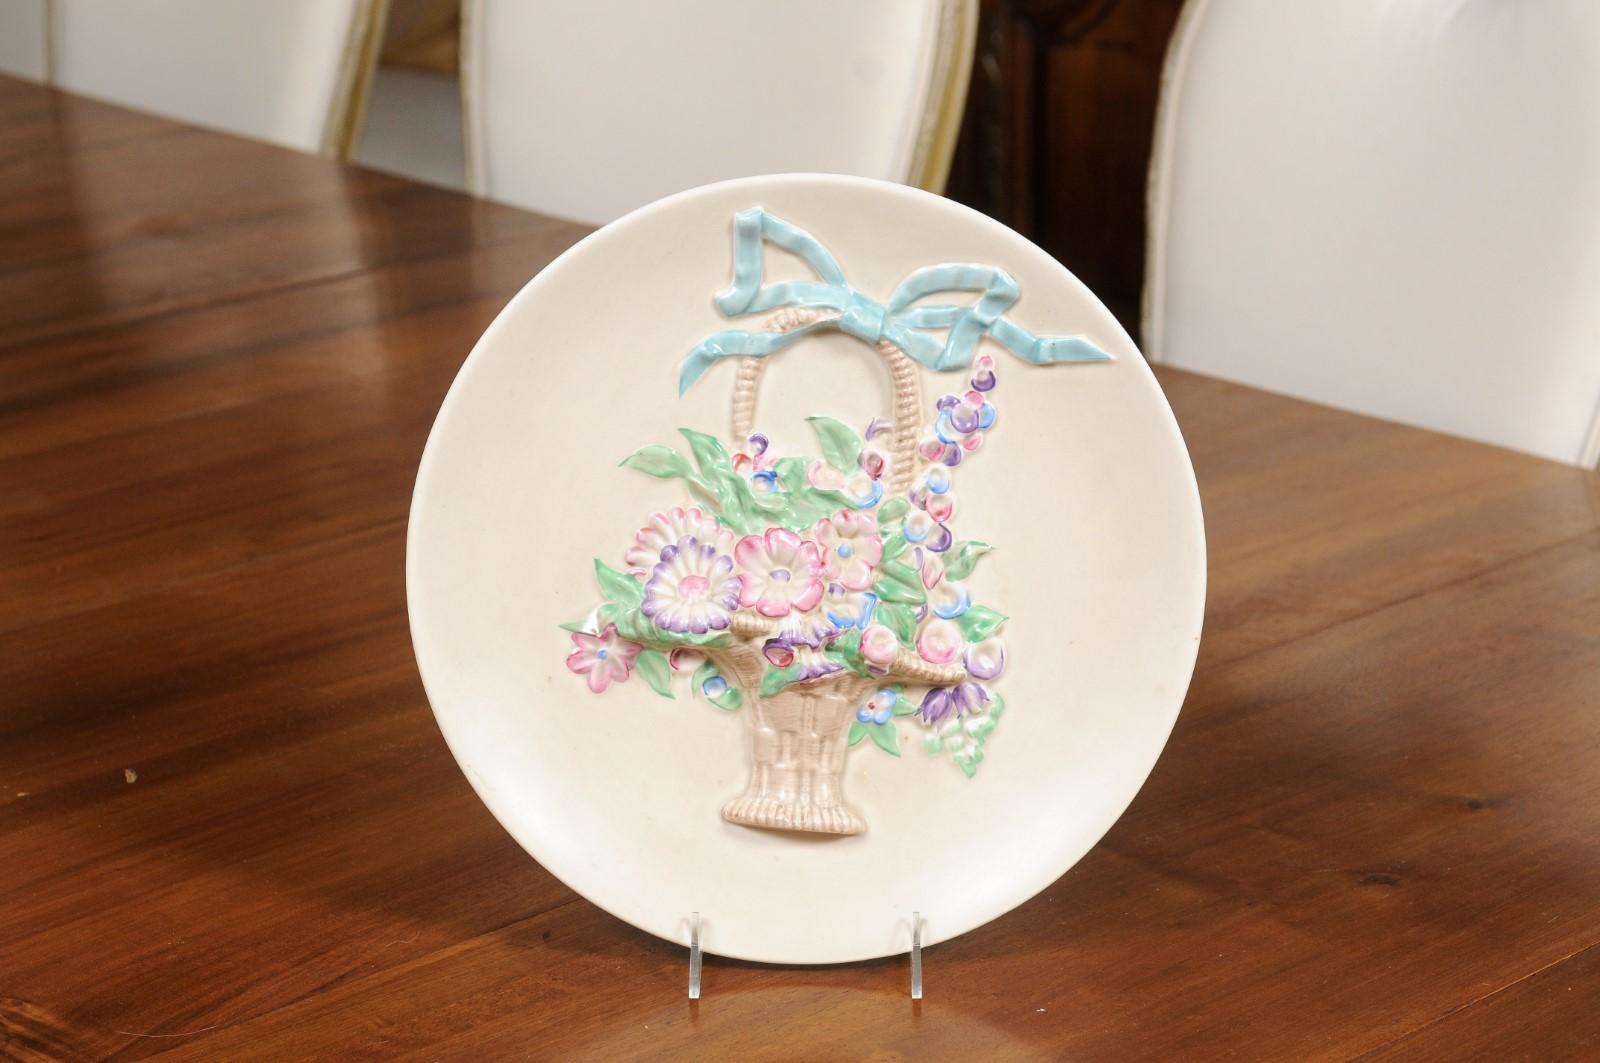 An English porcelain hanging plate from the 19th century, depicting a ribbon tied wicker floral basket and signed Clarice Cliff, Newport Pottery England in the back. Created in England during the 19th century, this porcelain hanging plate, created